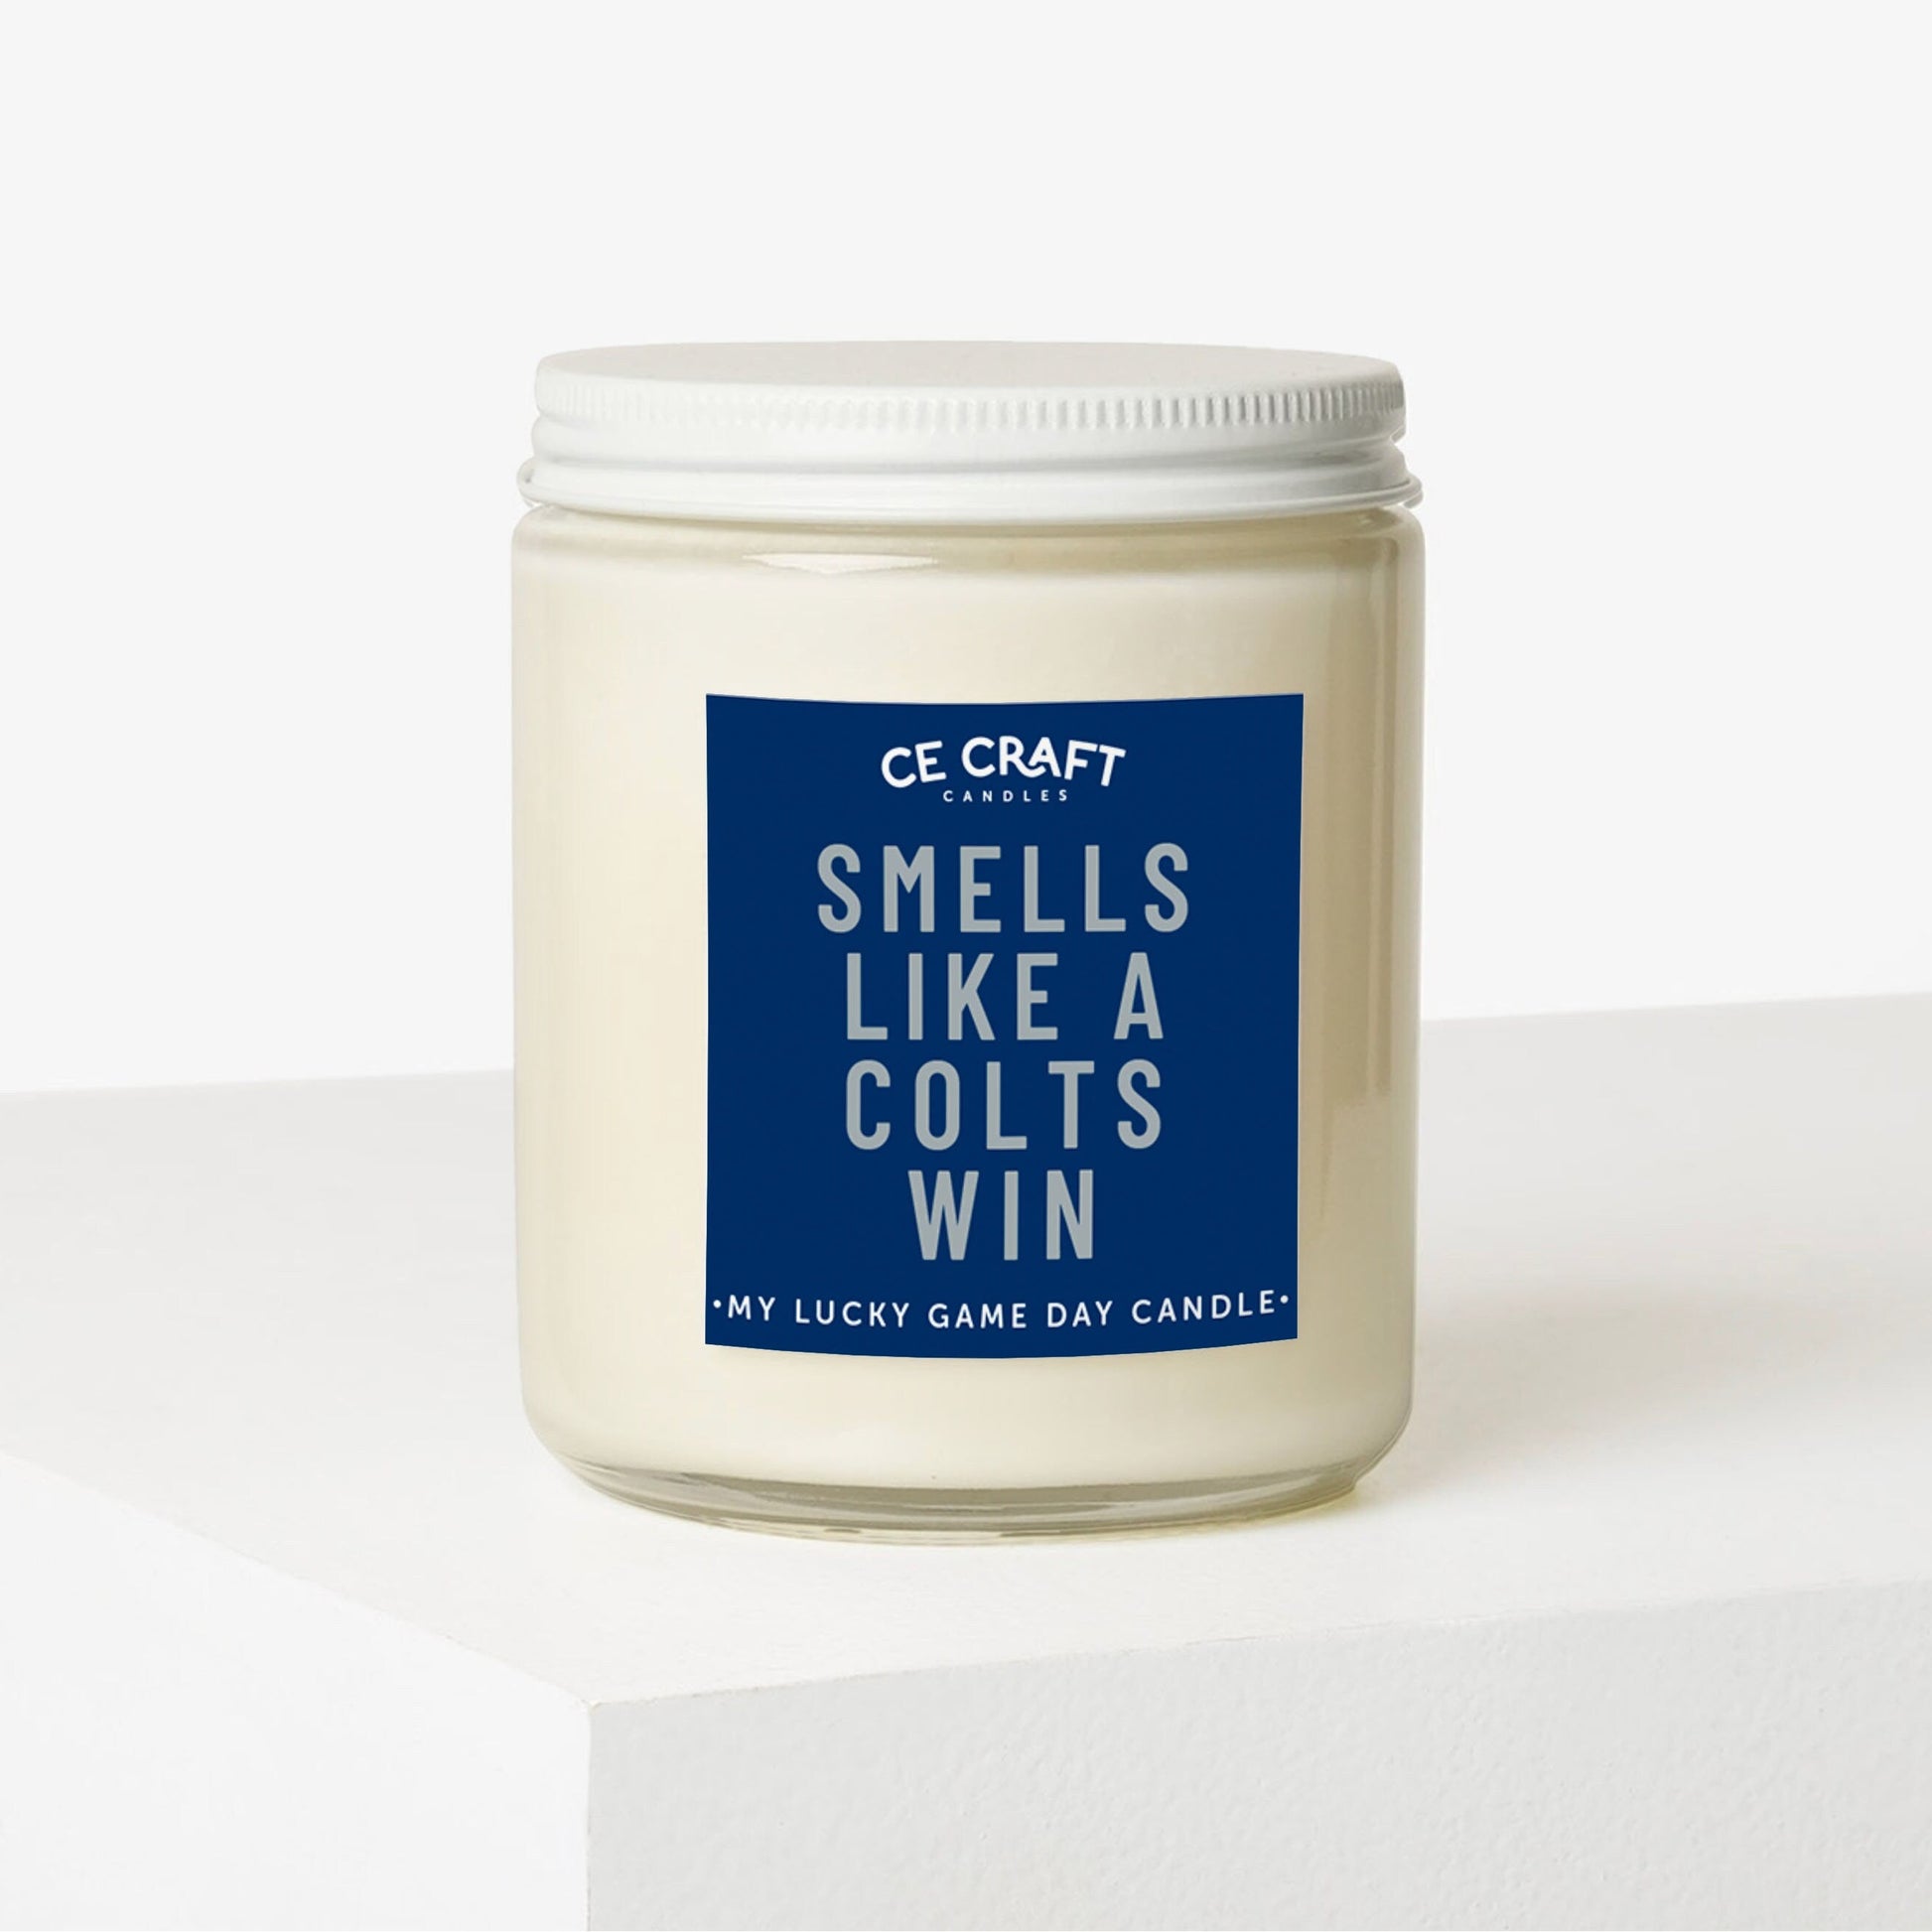 Smells Like a Colts Win Scented Candle C & E Craft Co 